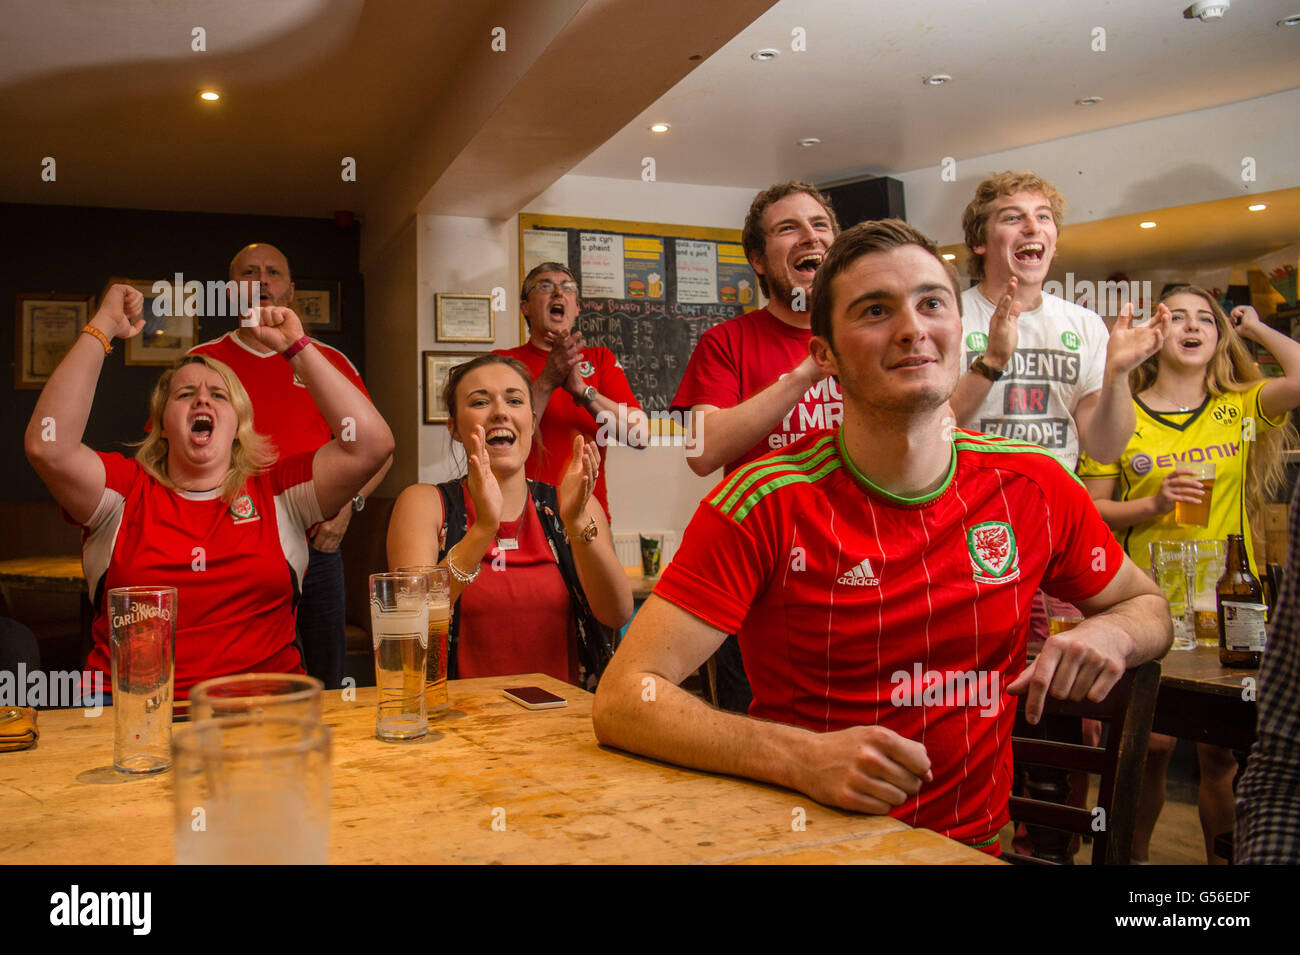 Aberystwyth, UK. 20th June, 2016. Euro 2016 : Welsh football fans in Yr Hen Lew Du  (Old Black Lion) pub in Aberystwyth celebrate their team, winning 3-0 against Russia in their final group game in the Euro 2016 competition. With England being held to a 0-0 draw with Slovakia , Wales ended up in the top position in Group B   photo Credit:  Keith Morris / Alamy Live News Stock Photo